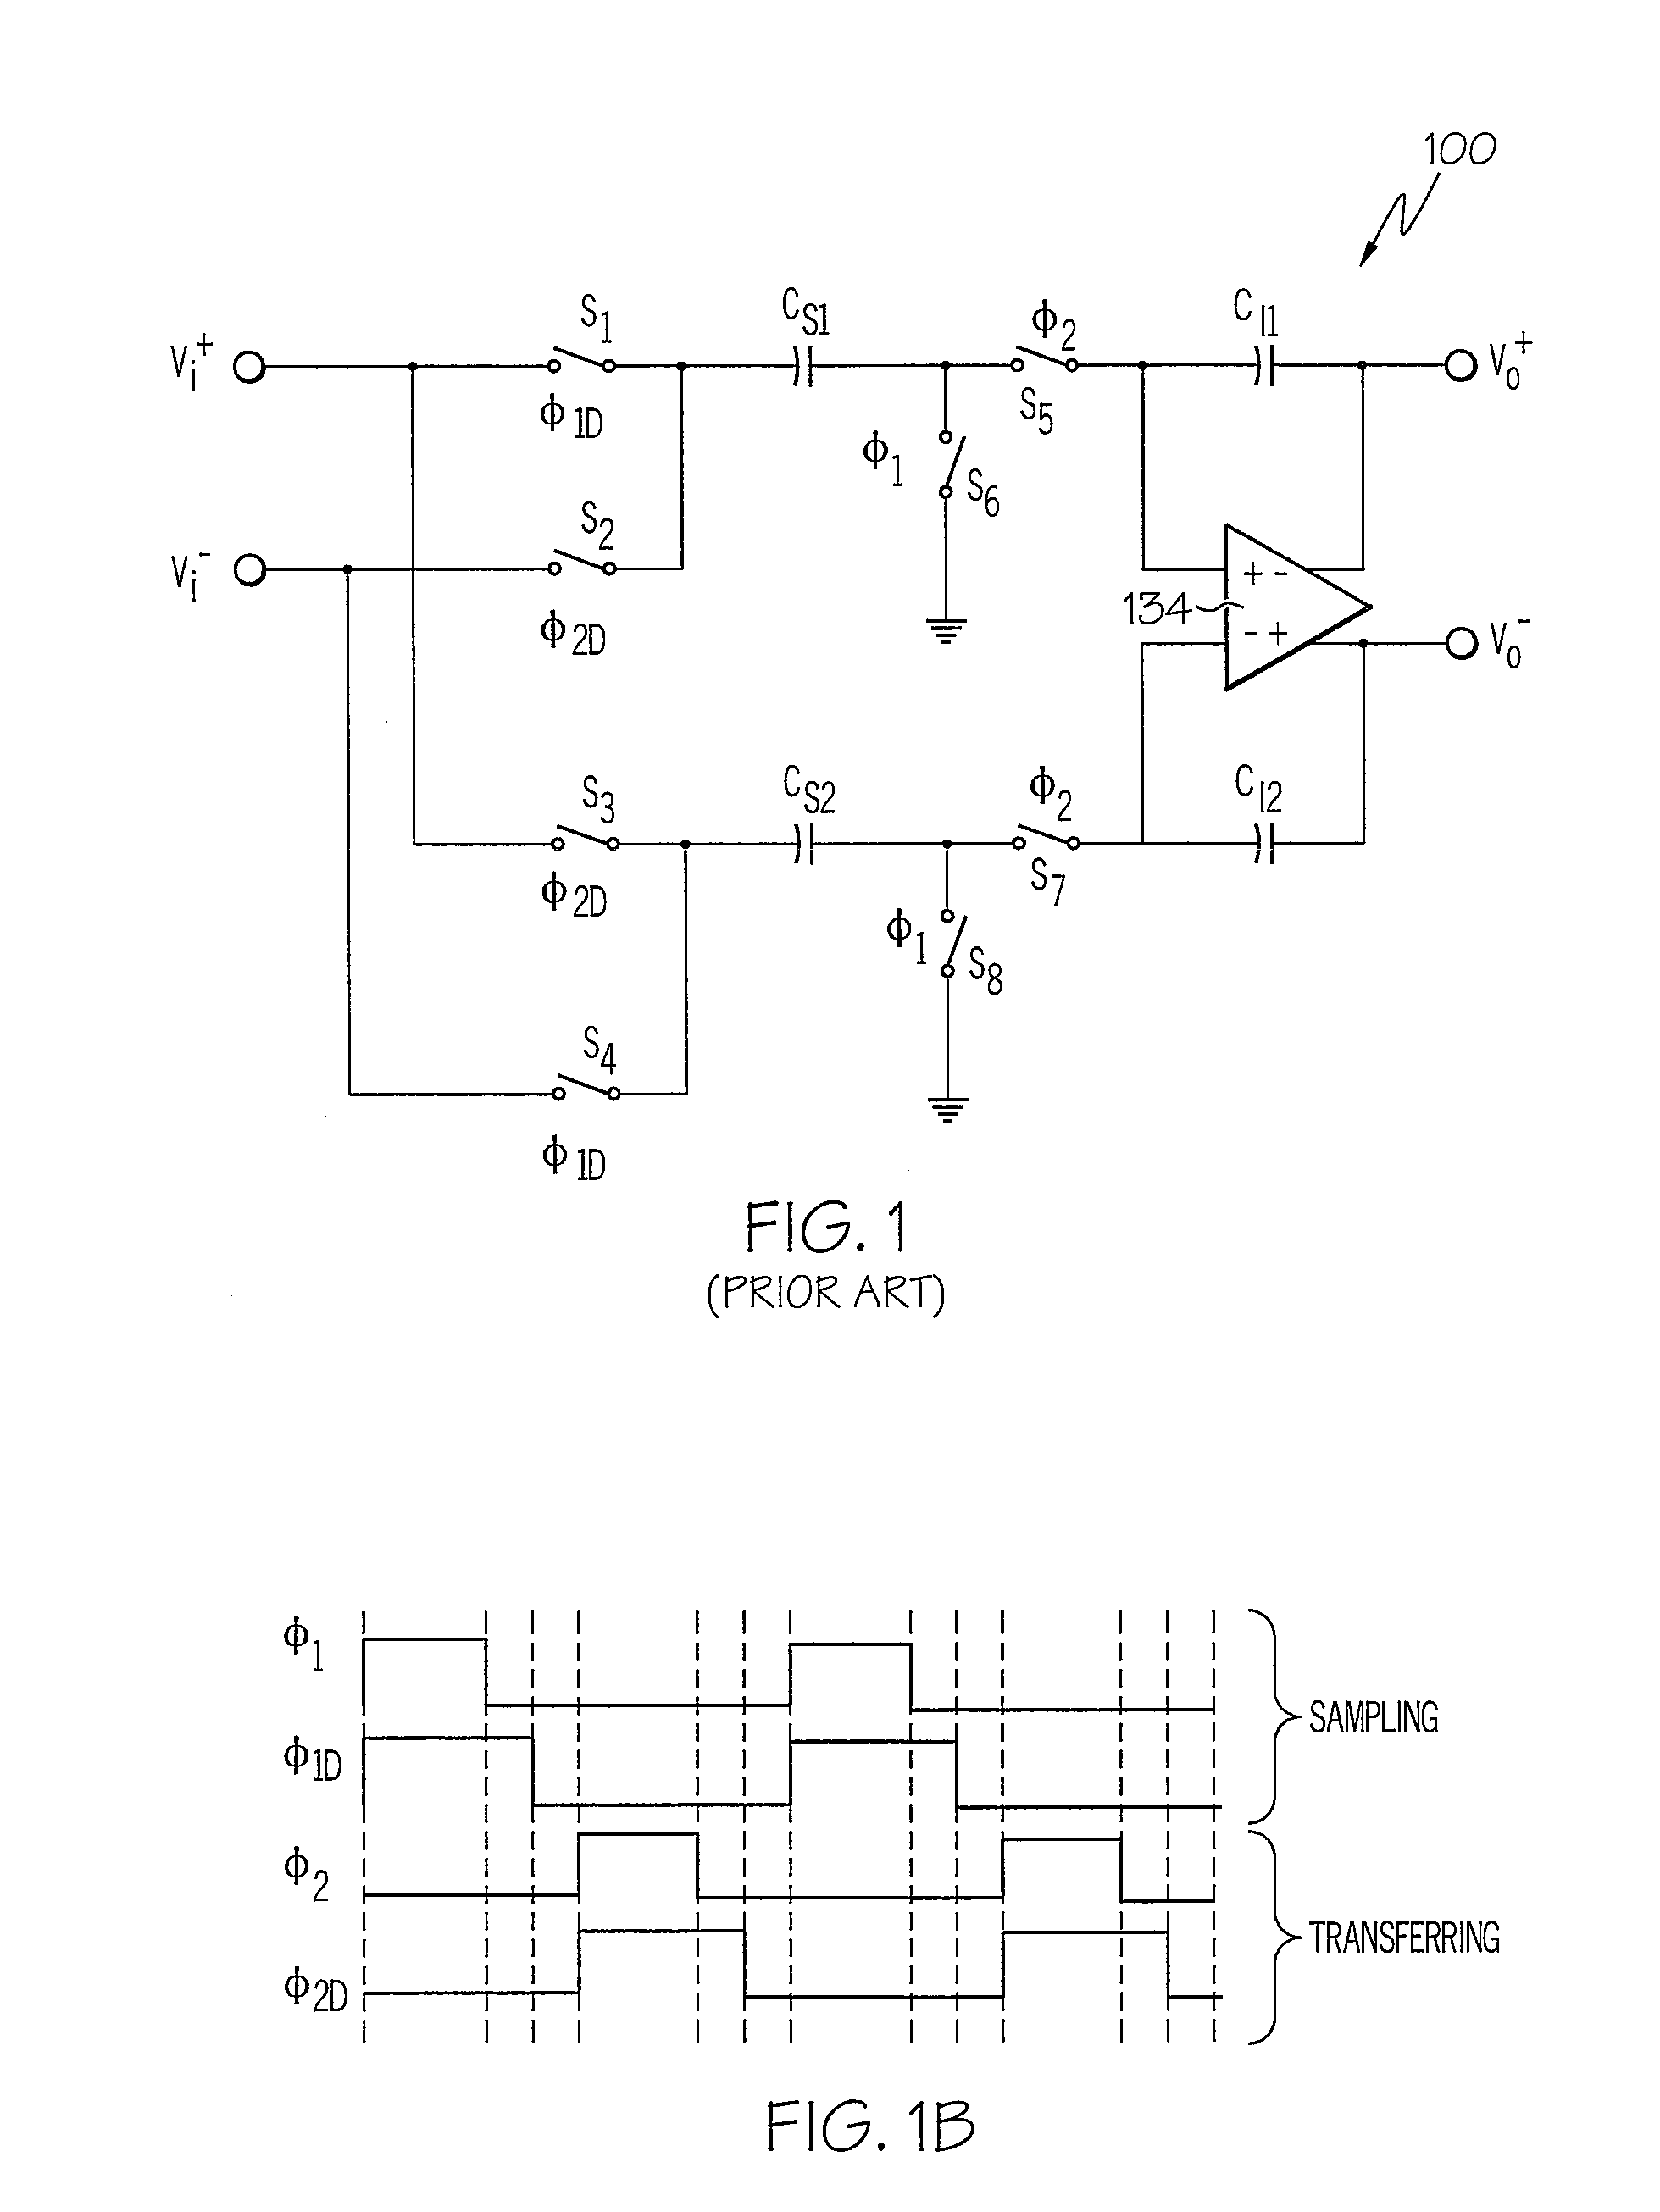 Switched-Capacitor Circuit